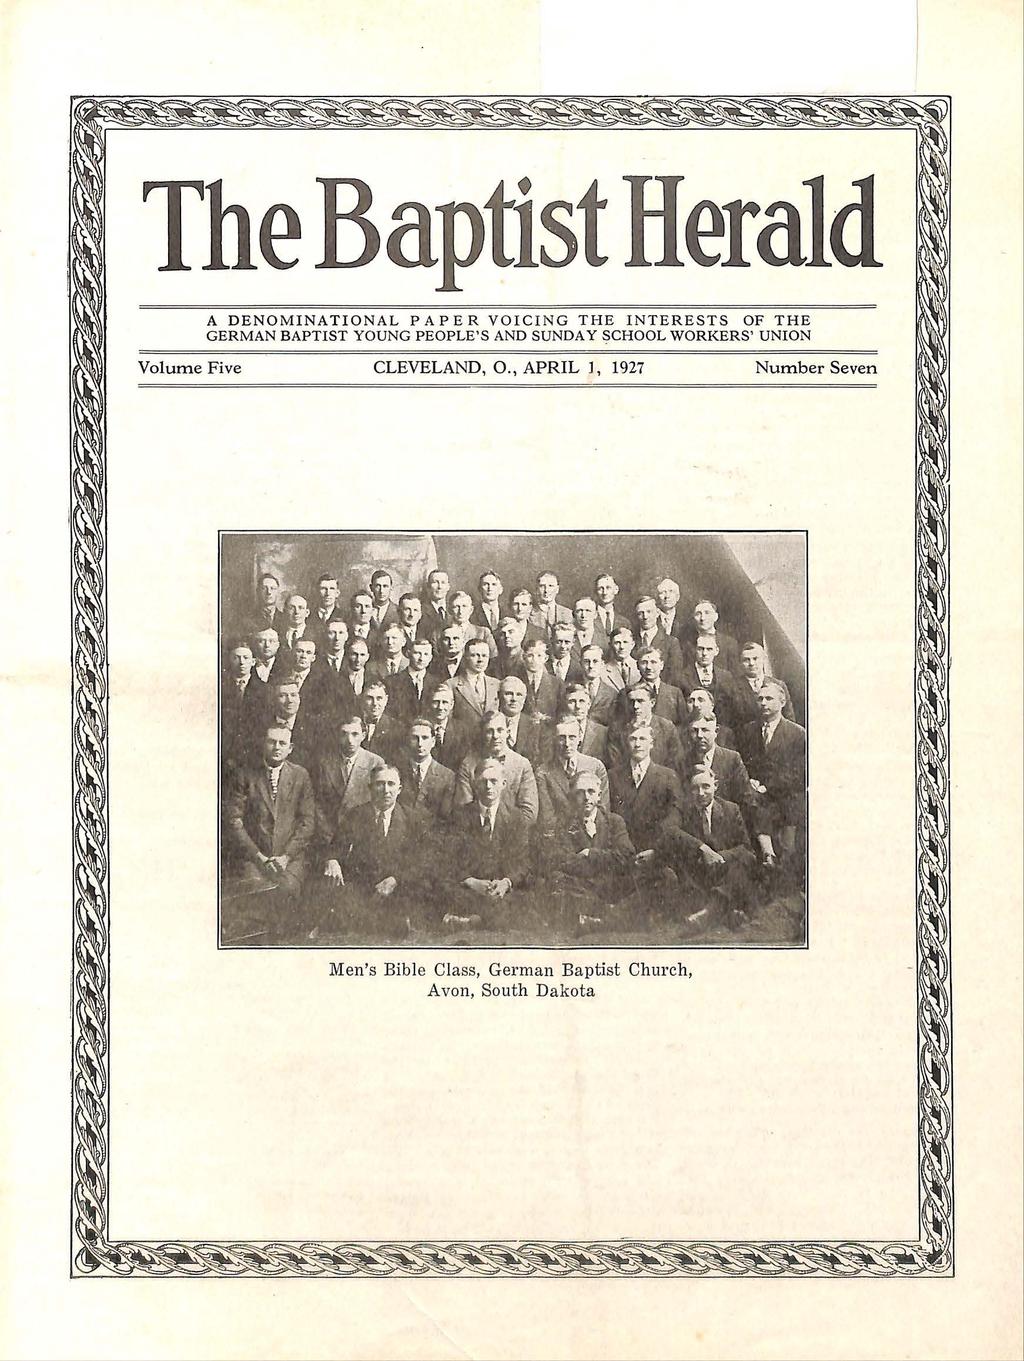 Te Baptist Herald A DENOMNATONAL PAPER VOC N G THE NTERESTS OF THE GERMAN BAPTST YOUNG PEOPLES AND SUNDAY SCHOOL